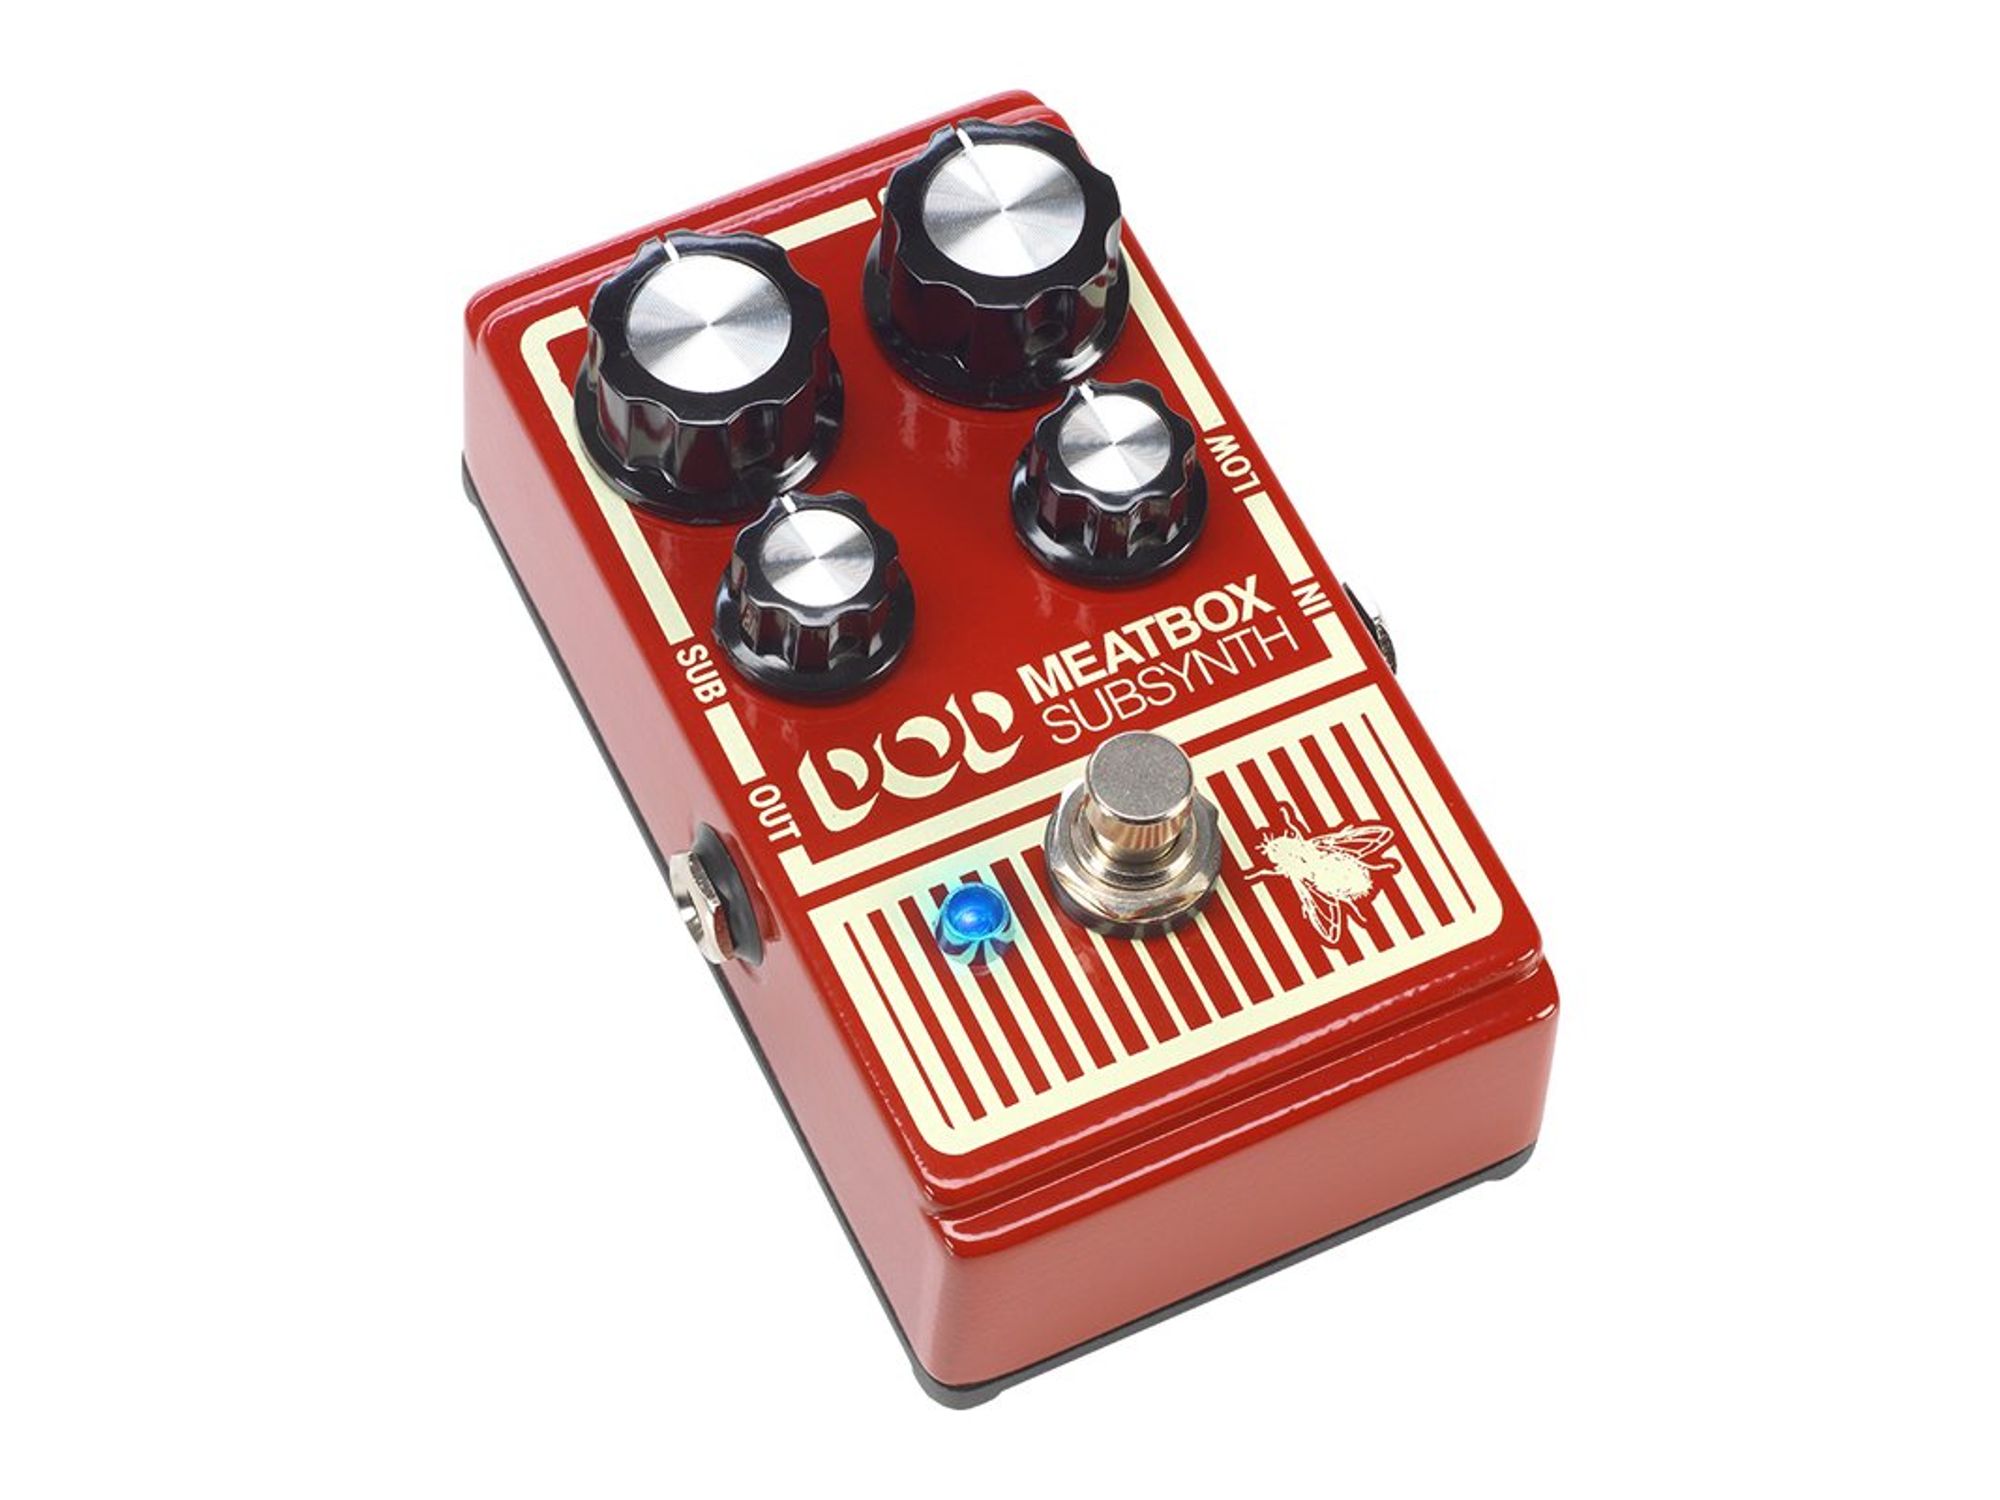 Digitech/DOD Relaunches the DOD Meatbox